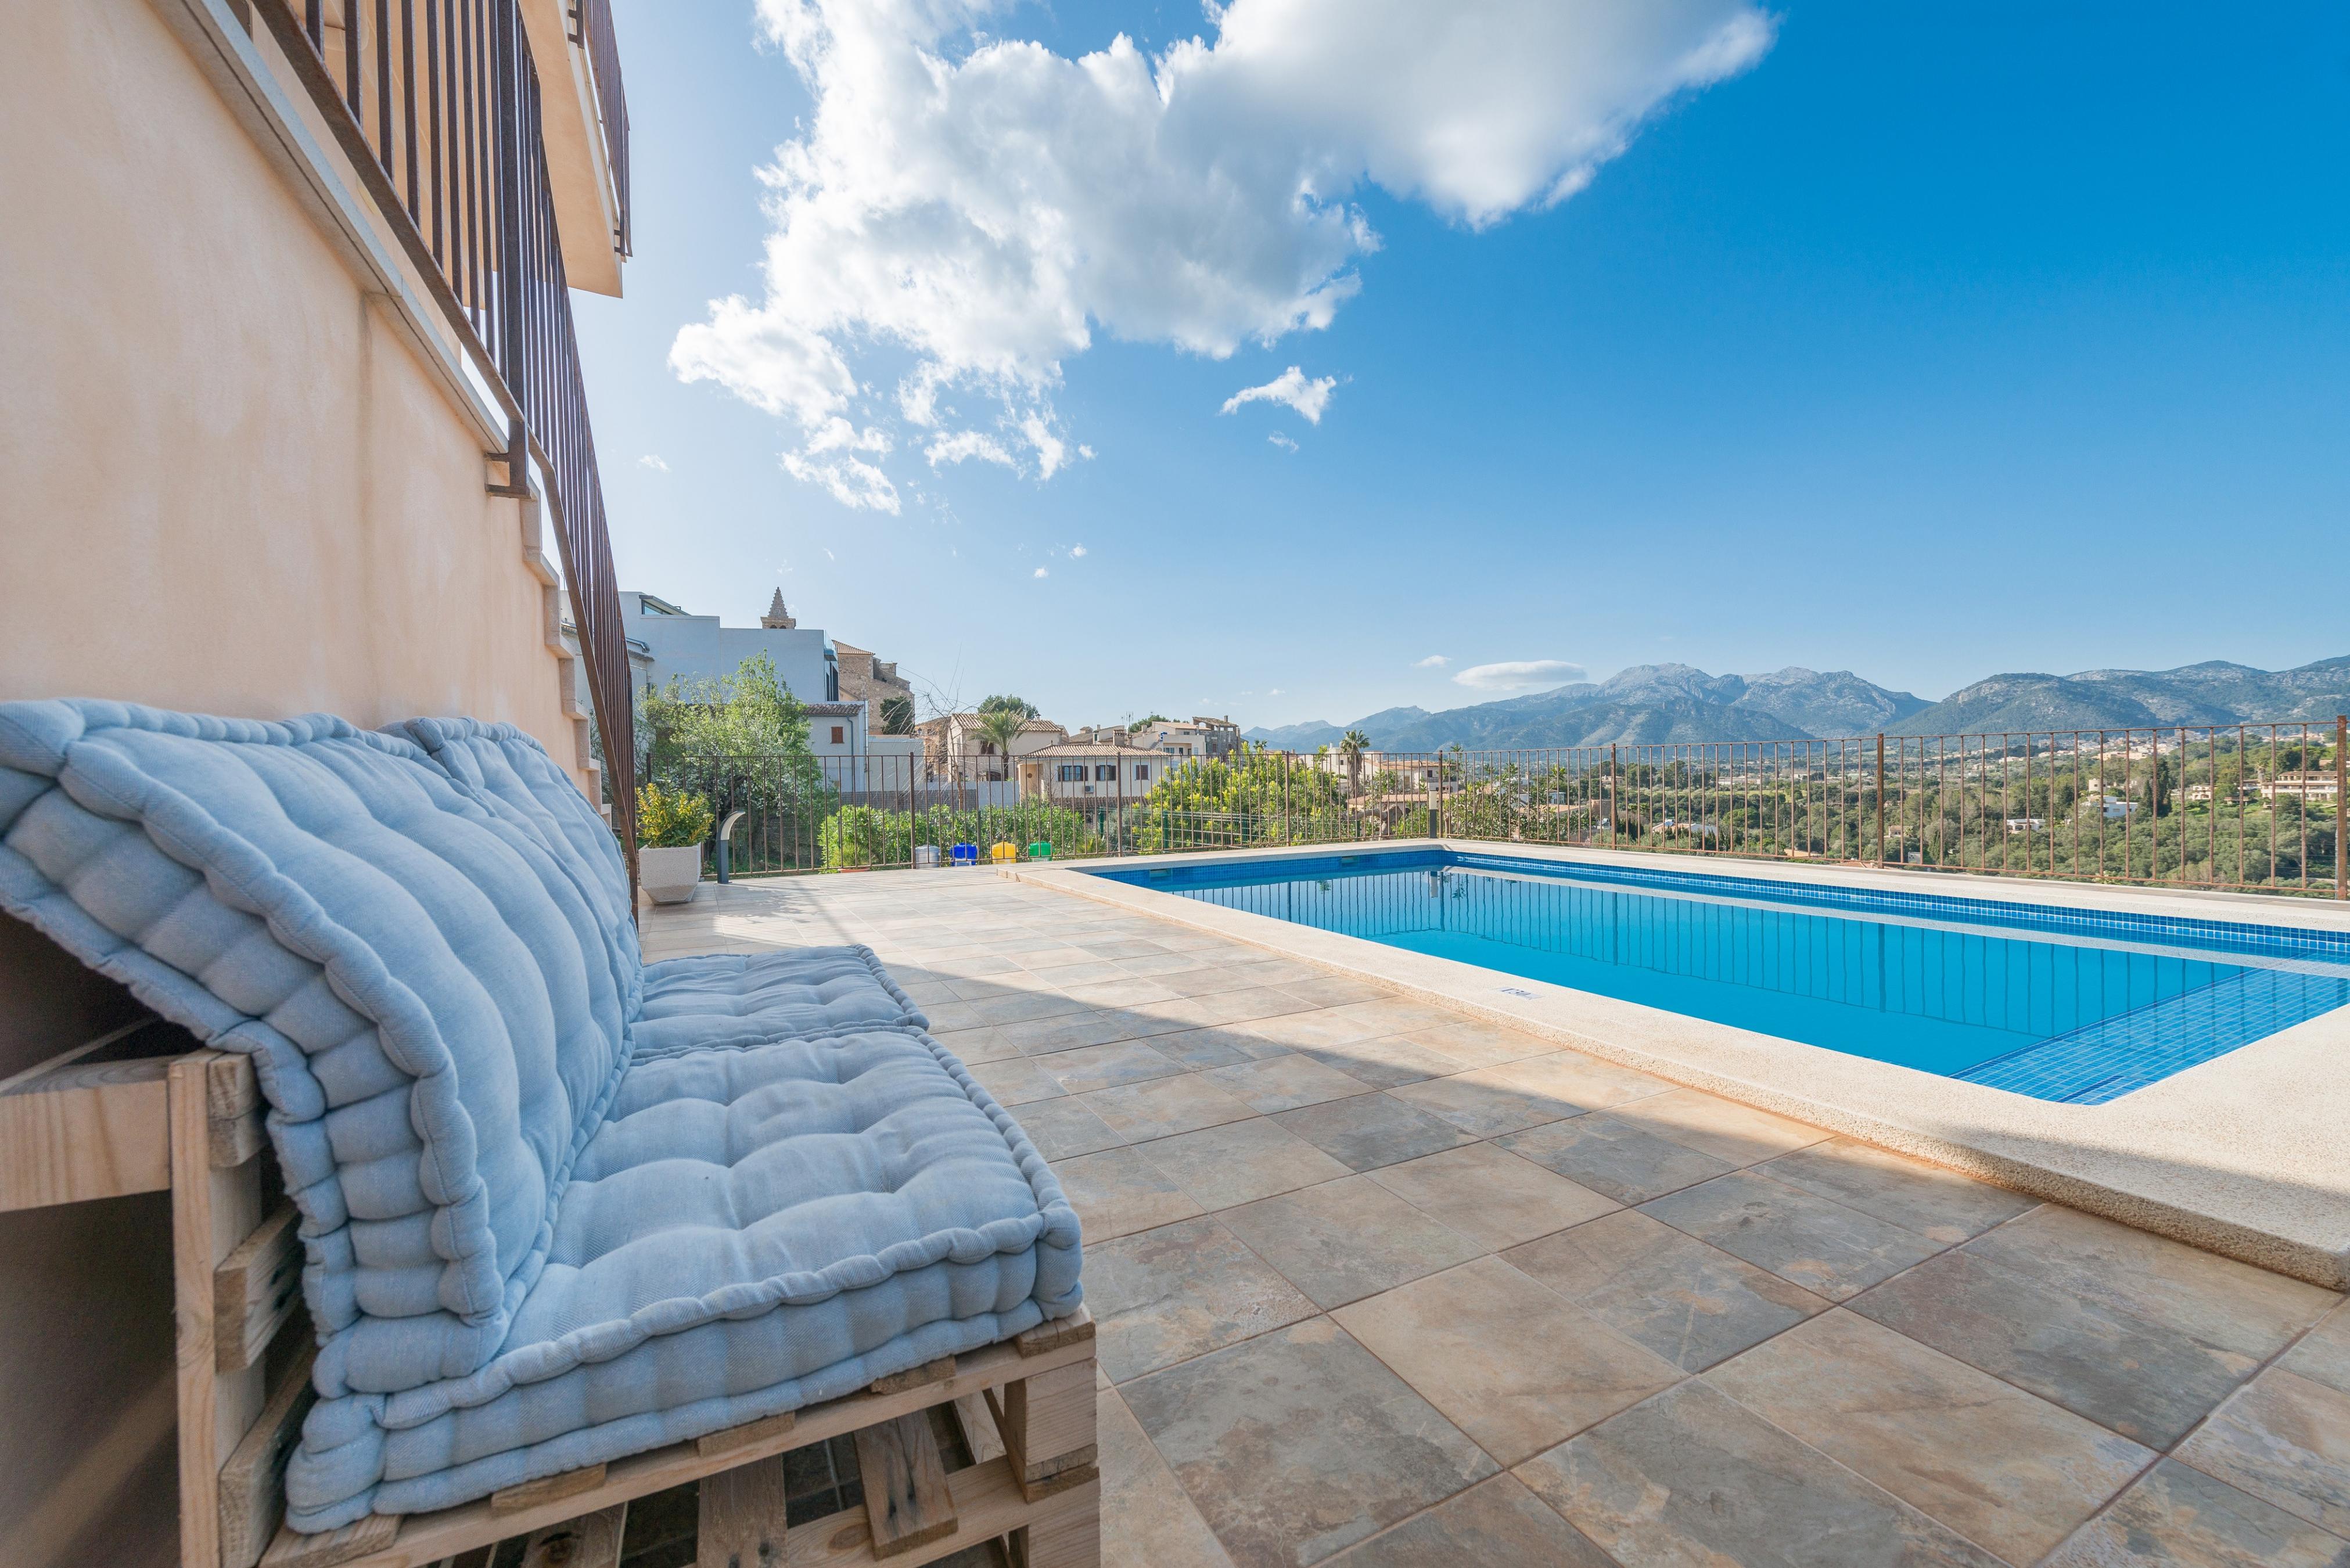 Property Image 2 - CAN JAUME FUSTER - Great house with breath-taking views and private pool Free WiFi